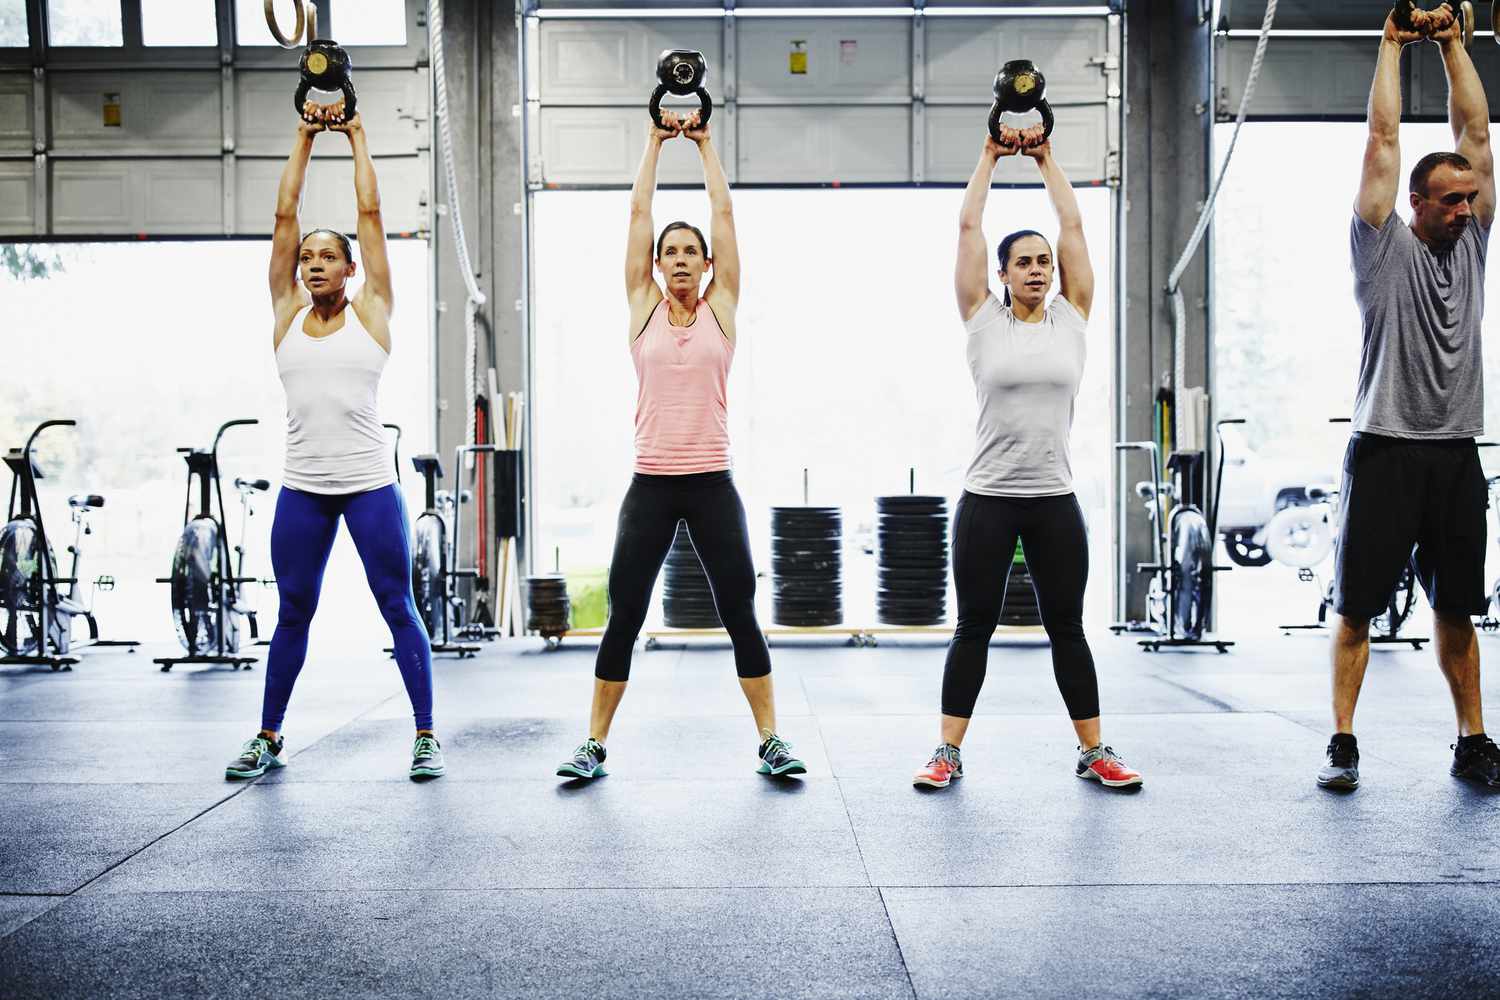 Three women (left) and one man (right) swing kettlebells overhead in a CrossFit gym